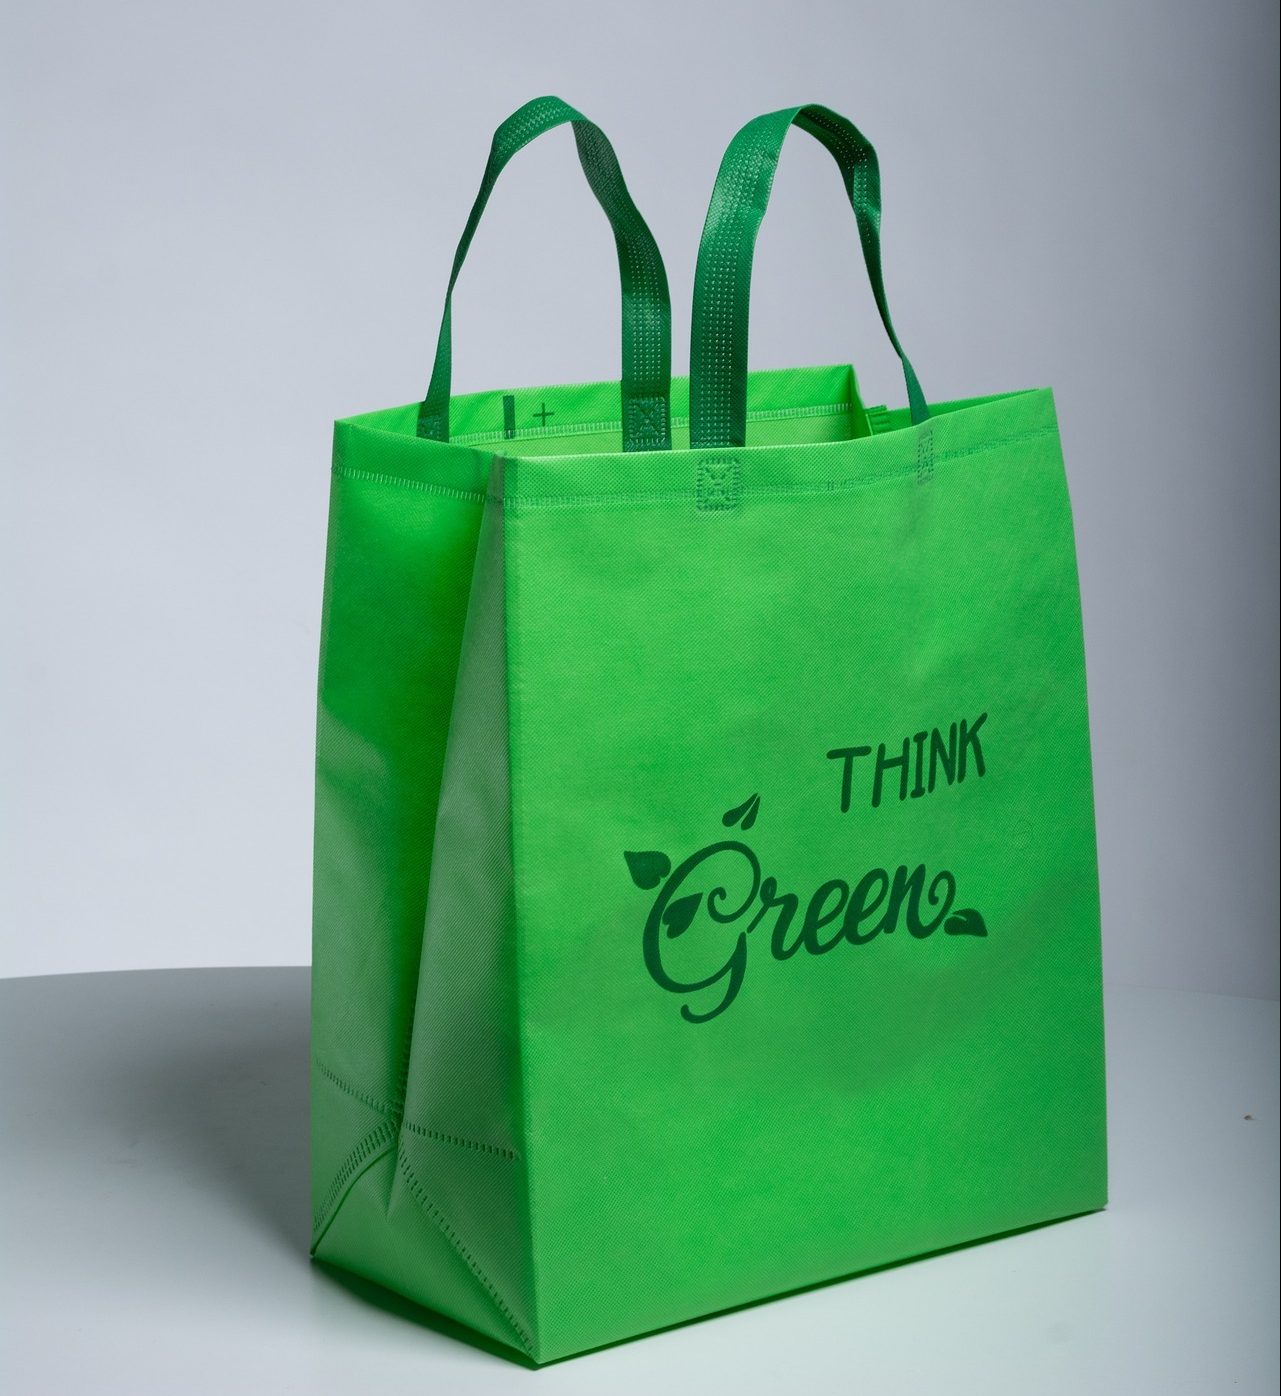 The arrival of ECO promotional gifts!